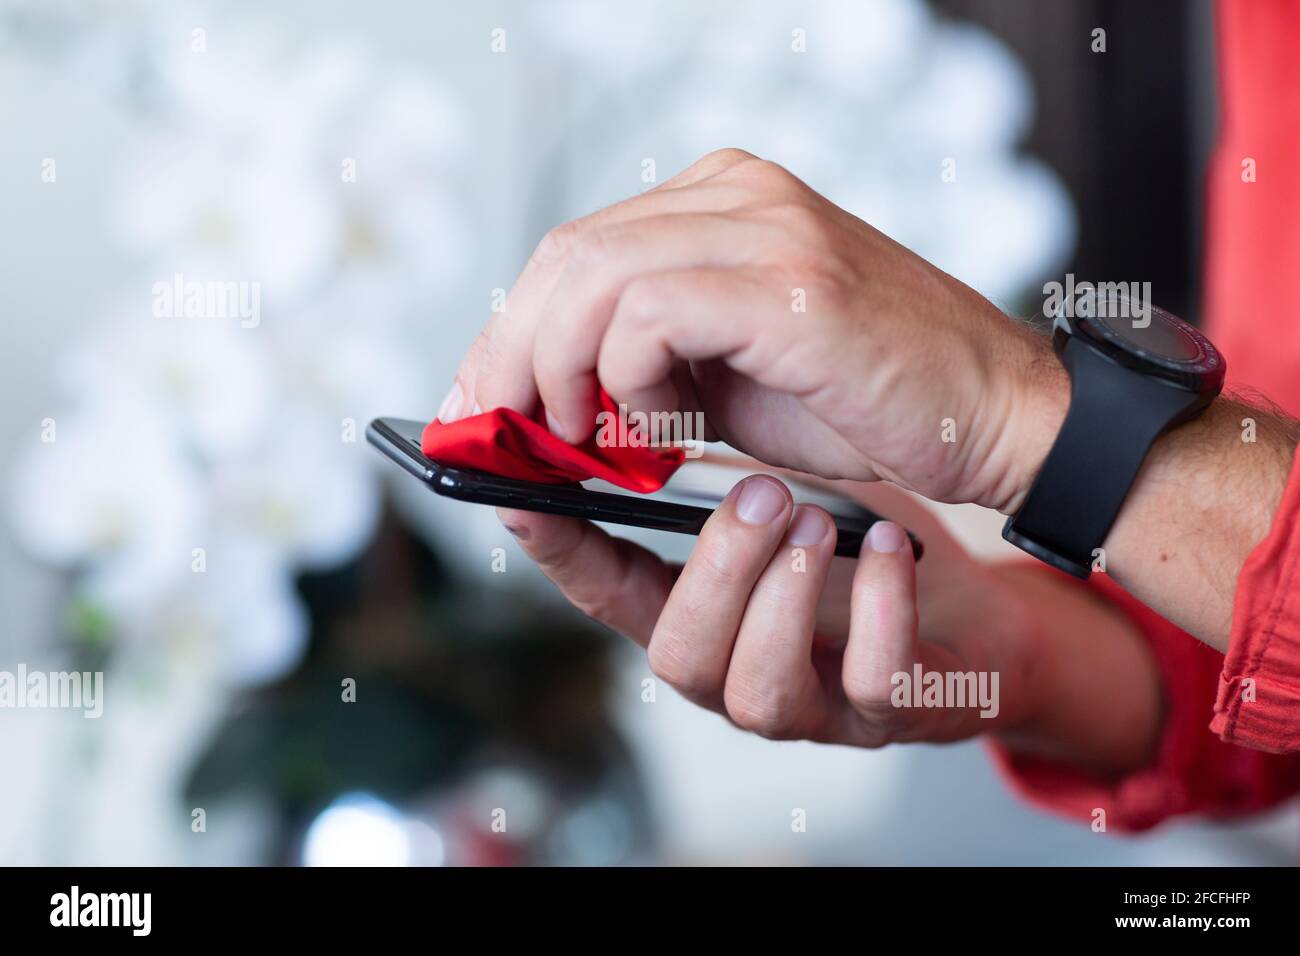 Midsection of businessman disinfecting smartphone with tissue Stock Photo